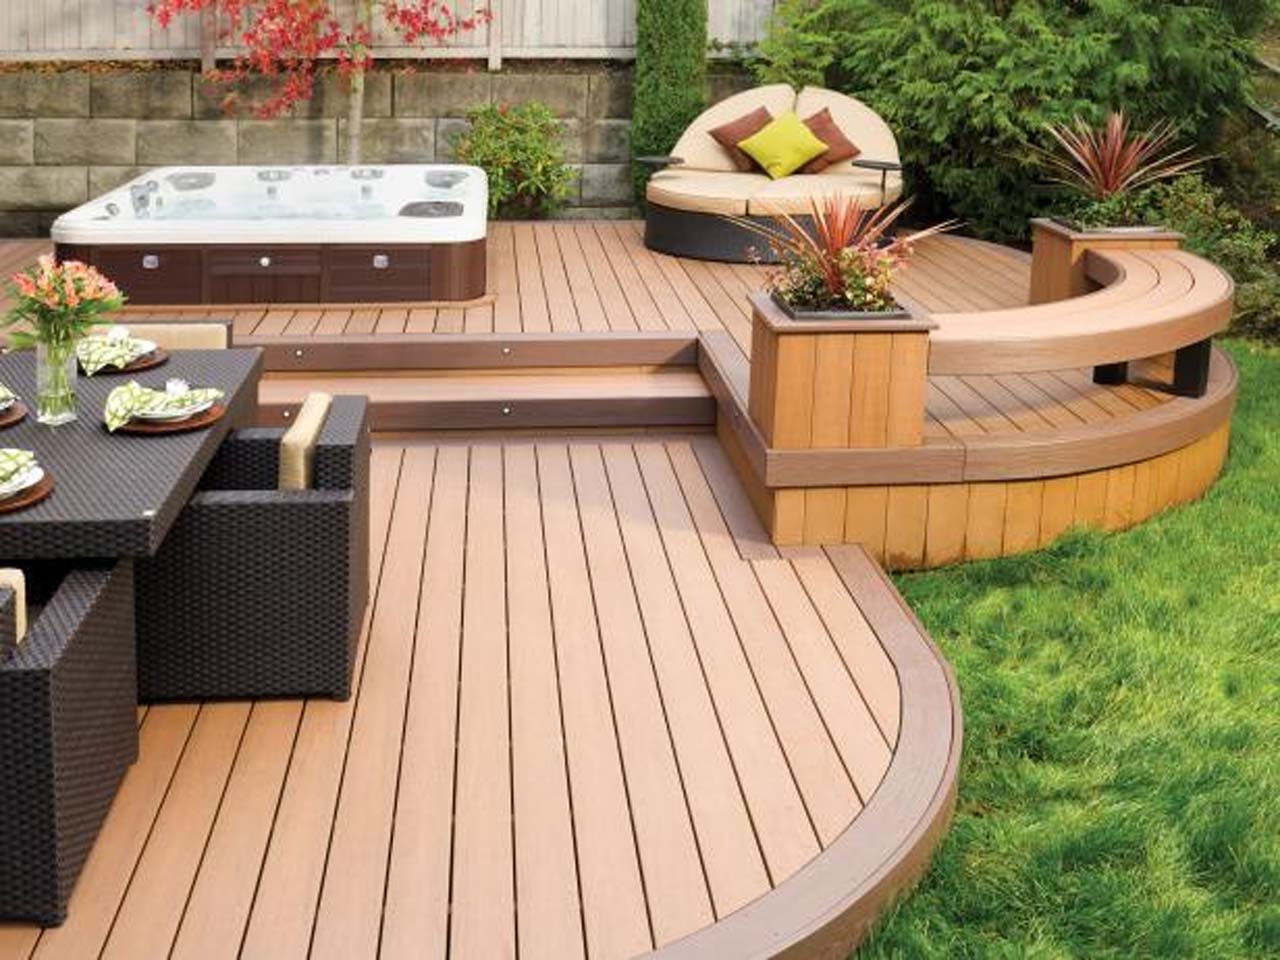 Create Additional Space By Building A Deck Or Finishing The Basement